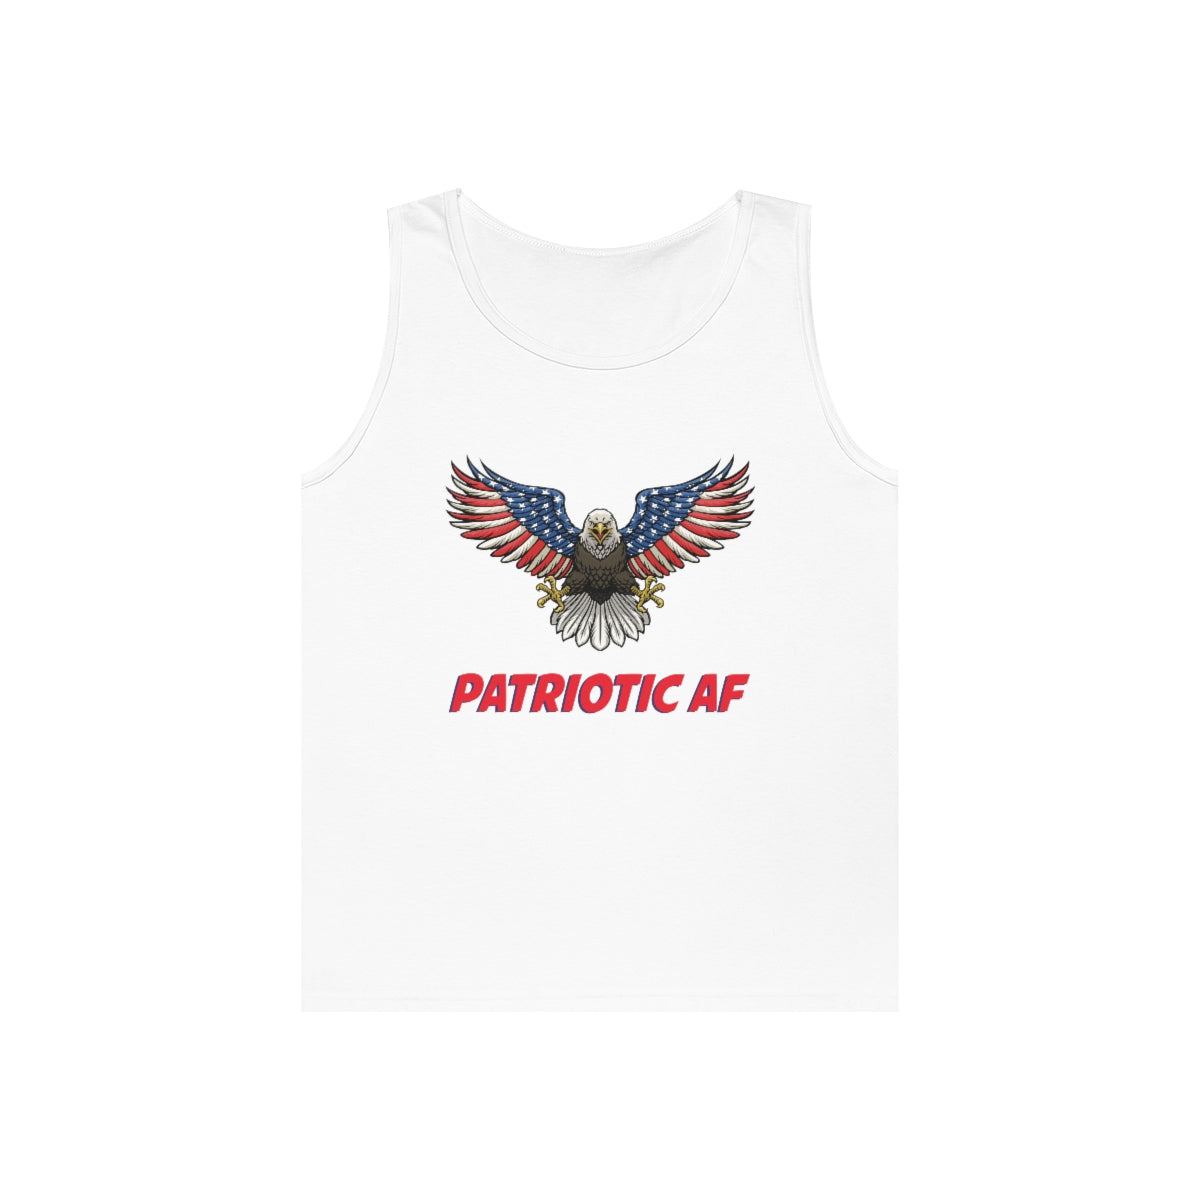 Patriotic AF with American Eagle 2 | Men's Heavy Cotton Tank Top - Rise of The New Media